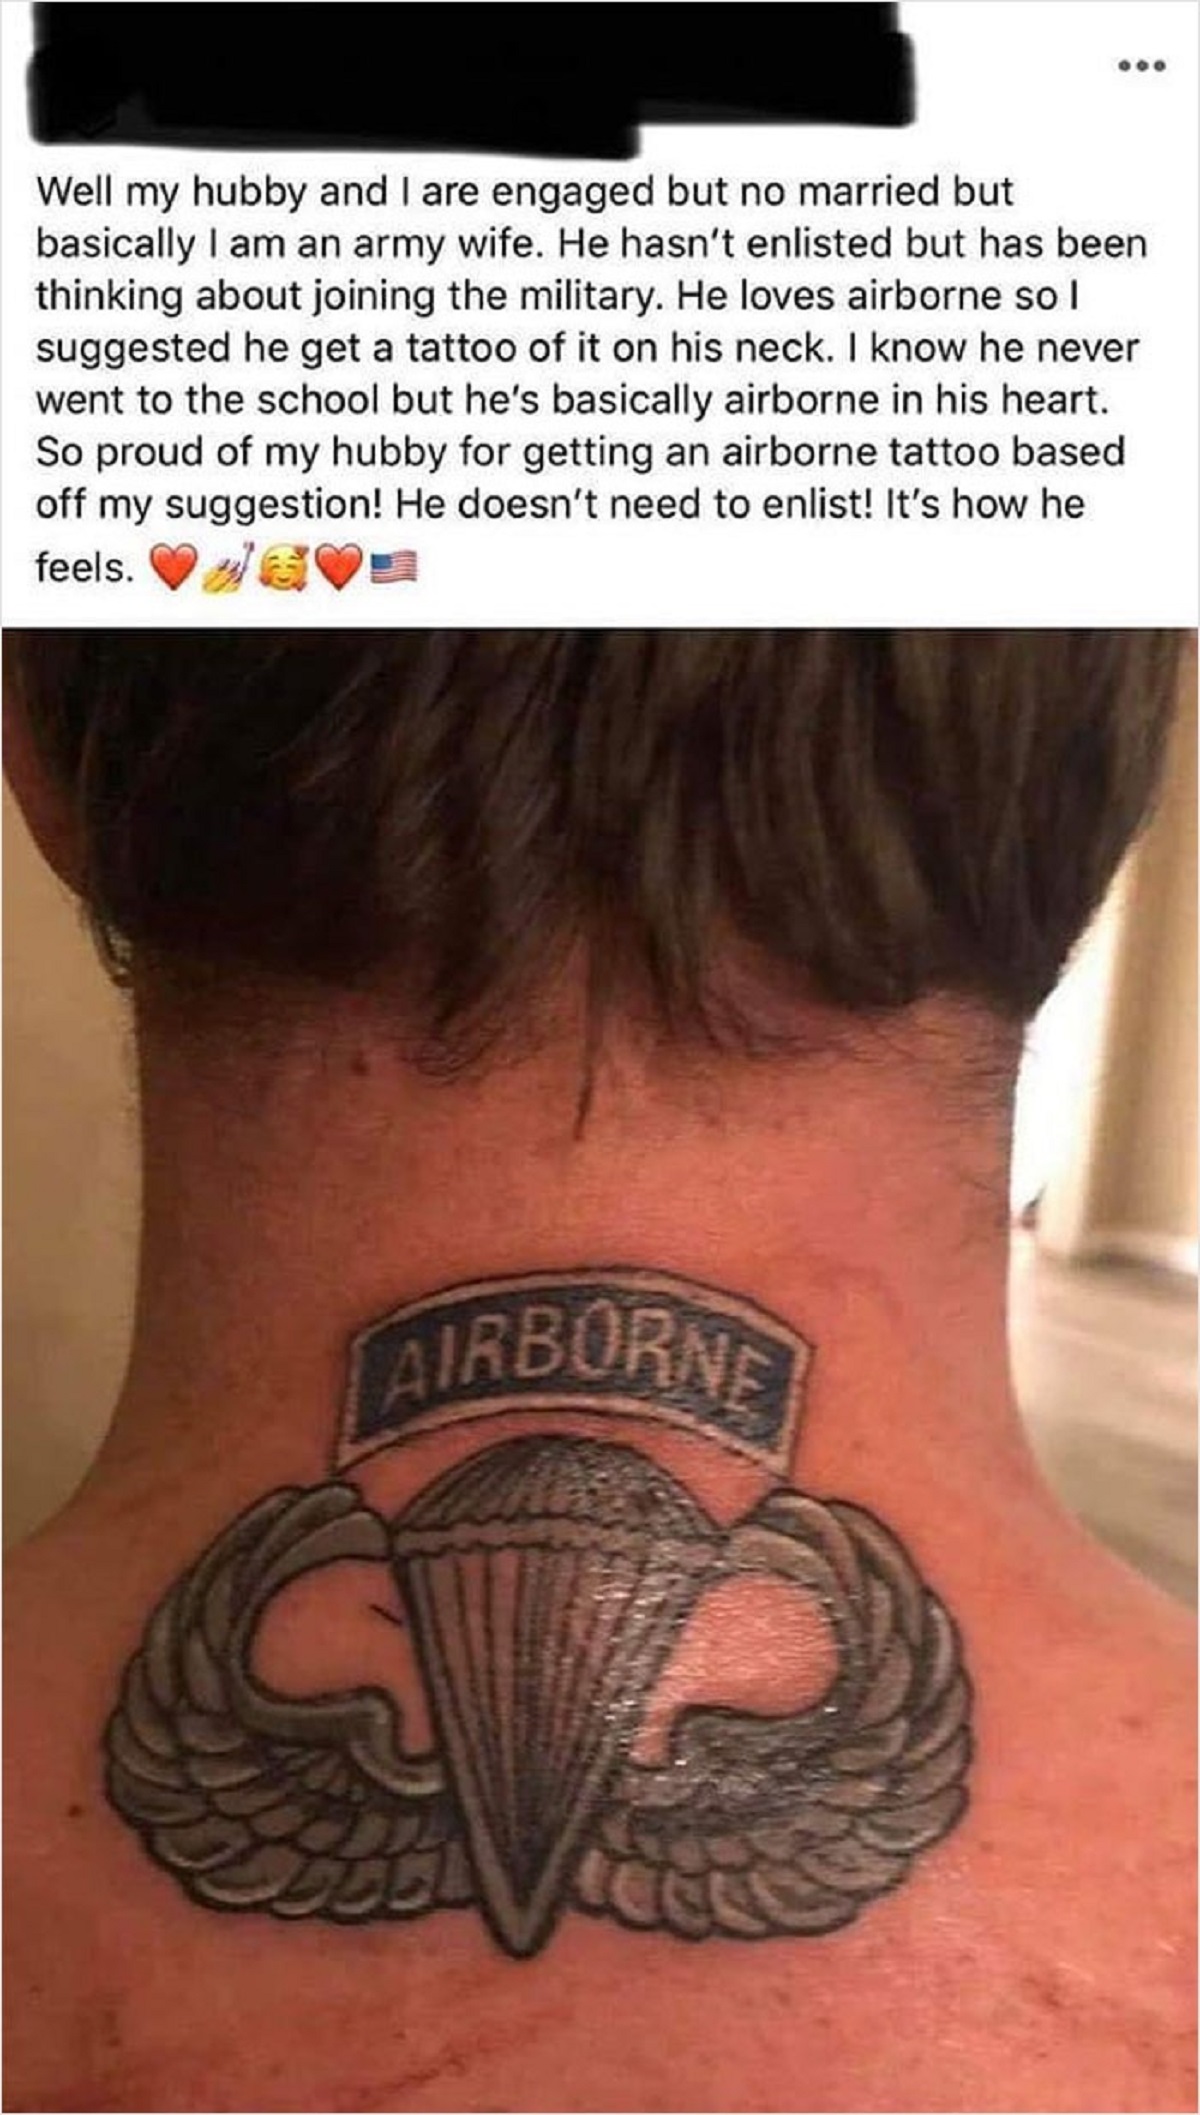 cringe pics - tattoo - Well my hubby and I are engaged but no married but basically I am an army wife. He hasn't enlisted but has been thinking about joining the military. He loves airborne so I suggested he get a tattoo of it on his neck. I know he never